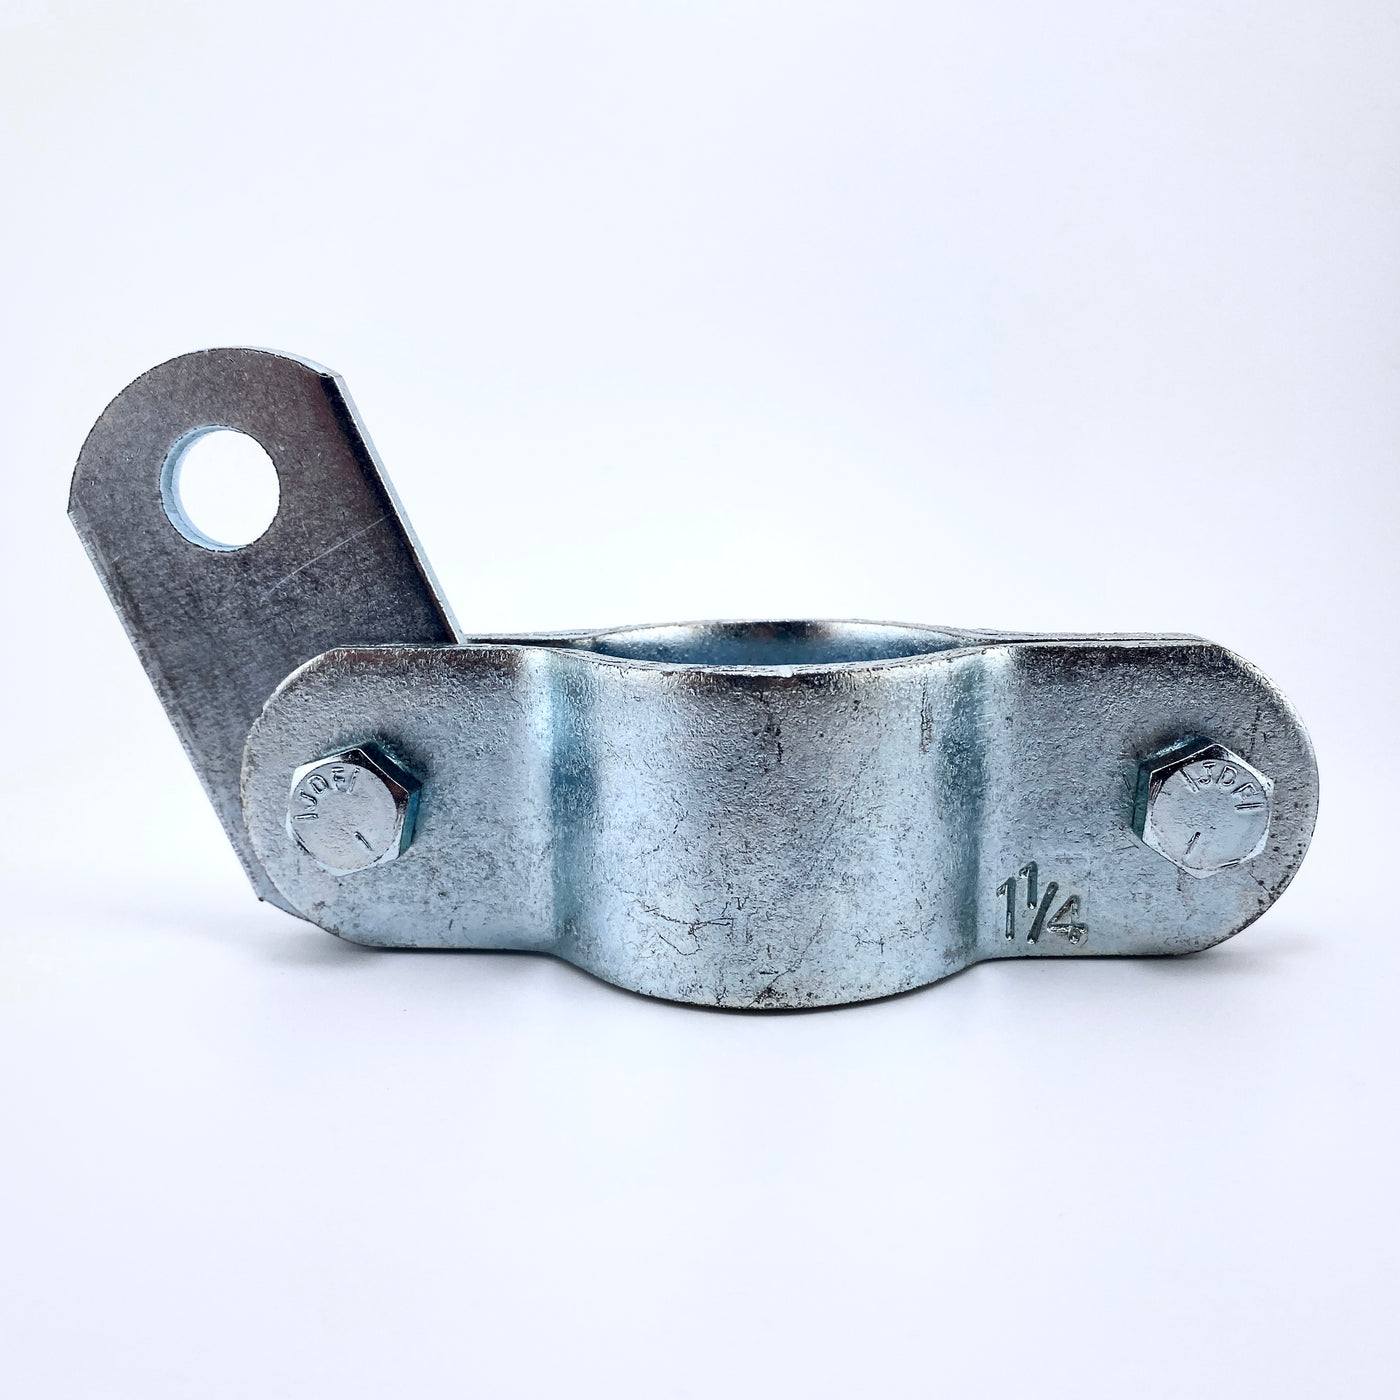 1-1/4-inch Pelican Pipe Clamp